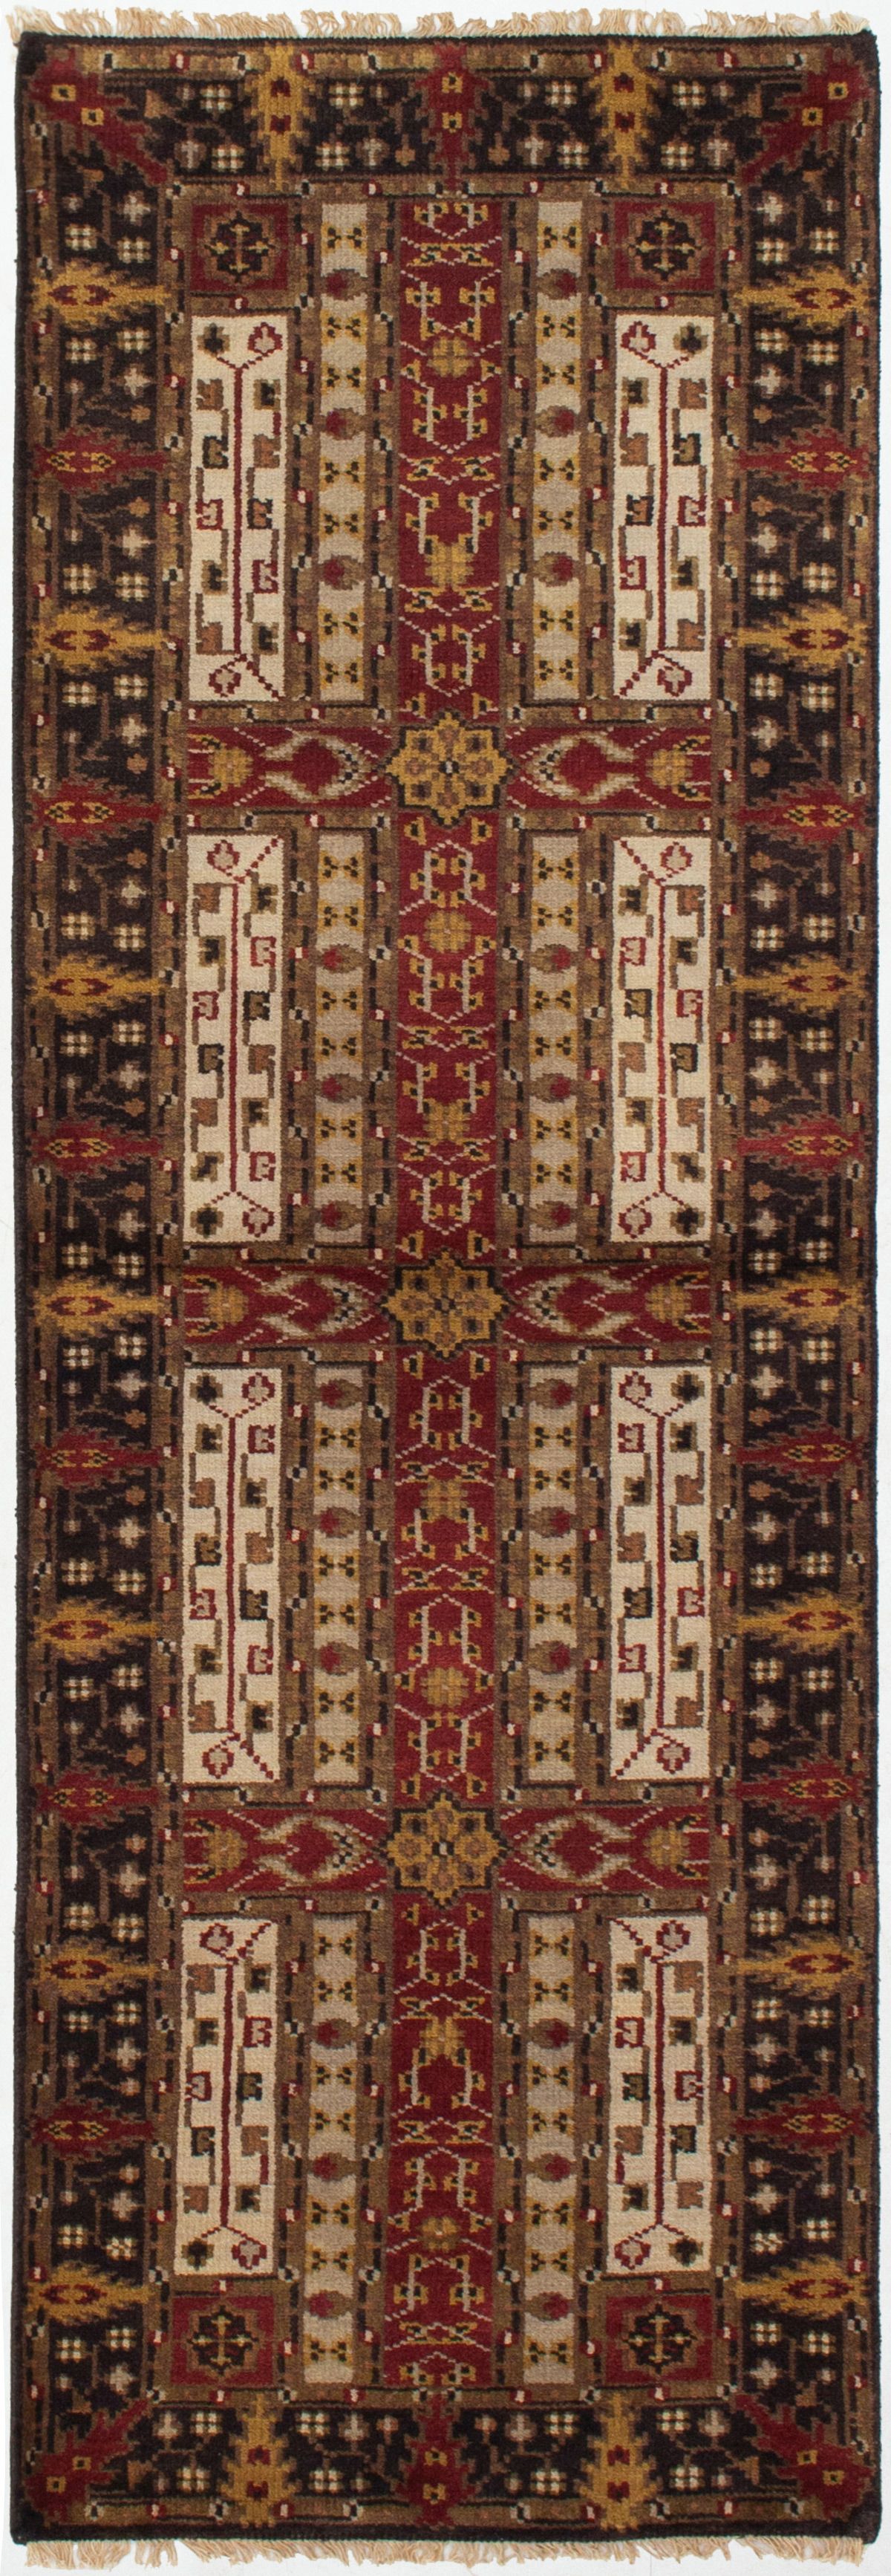 Hand-knotted Royal Mahal Cream, Red Wool Rug 2'7" x 8'2" Size: 2'7" x 8'2"  